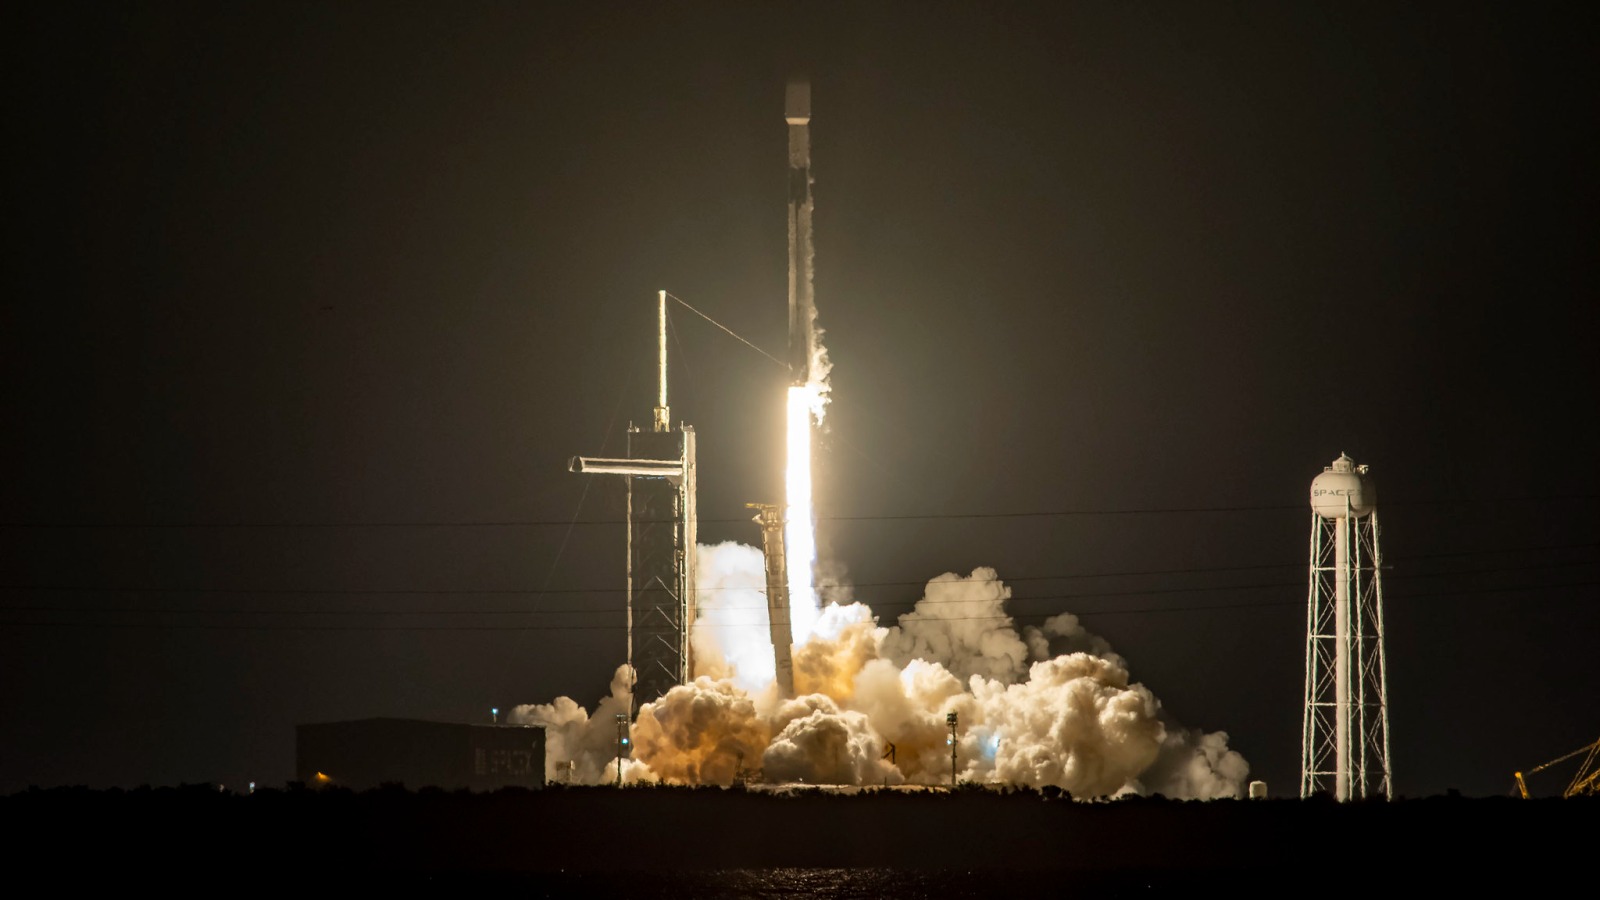 SpaceX sent 53 Starlink satellites to orbit on top of a Falcon 9 booster on May 6, 2022.